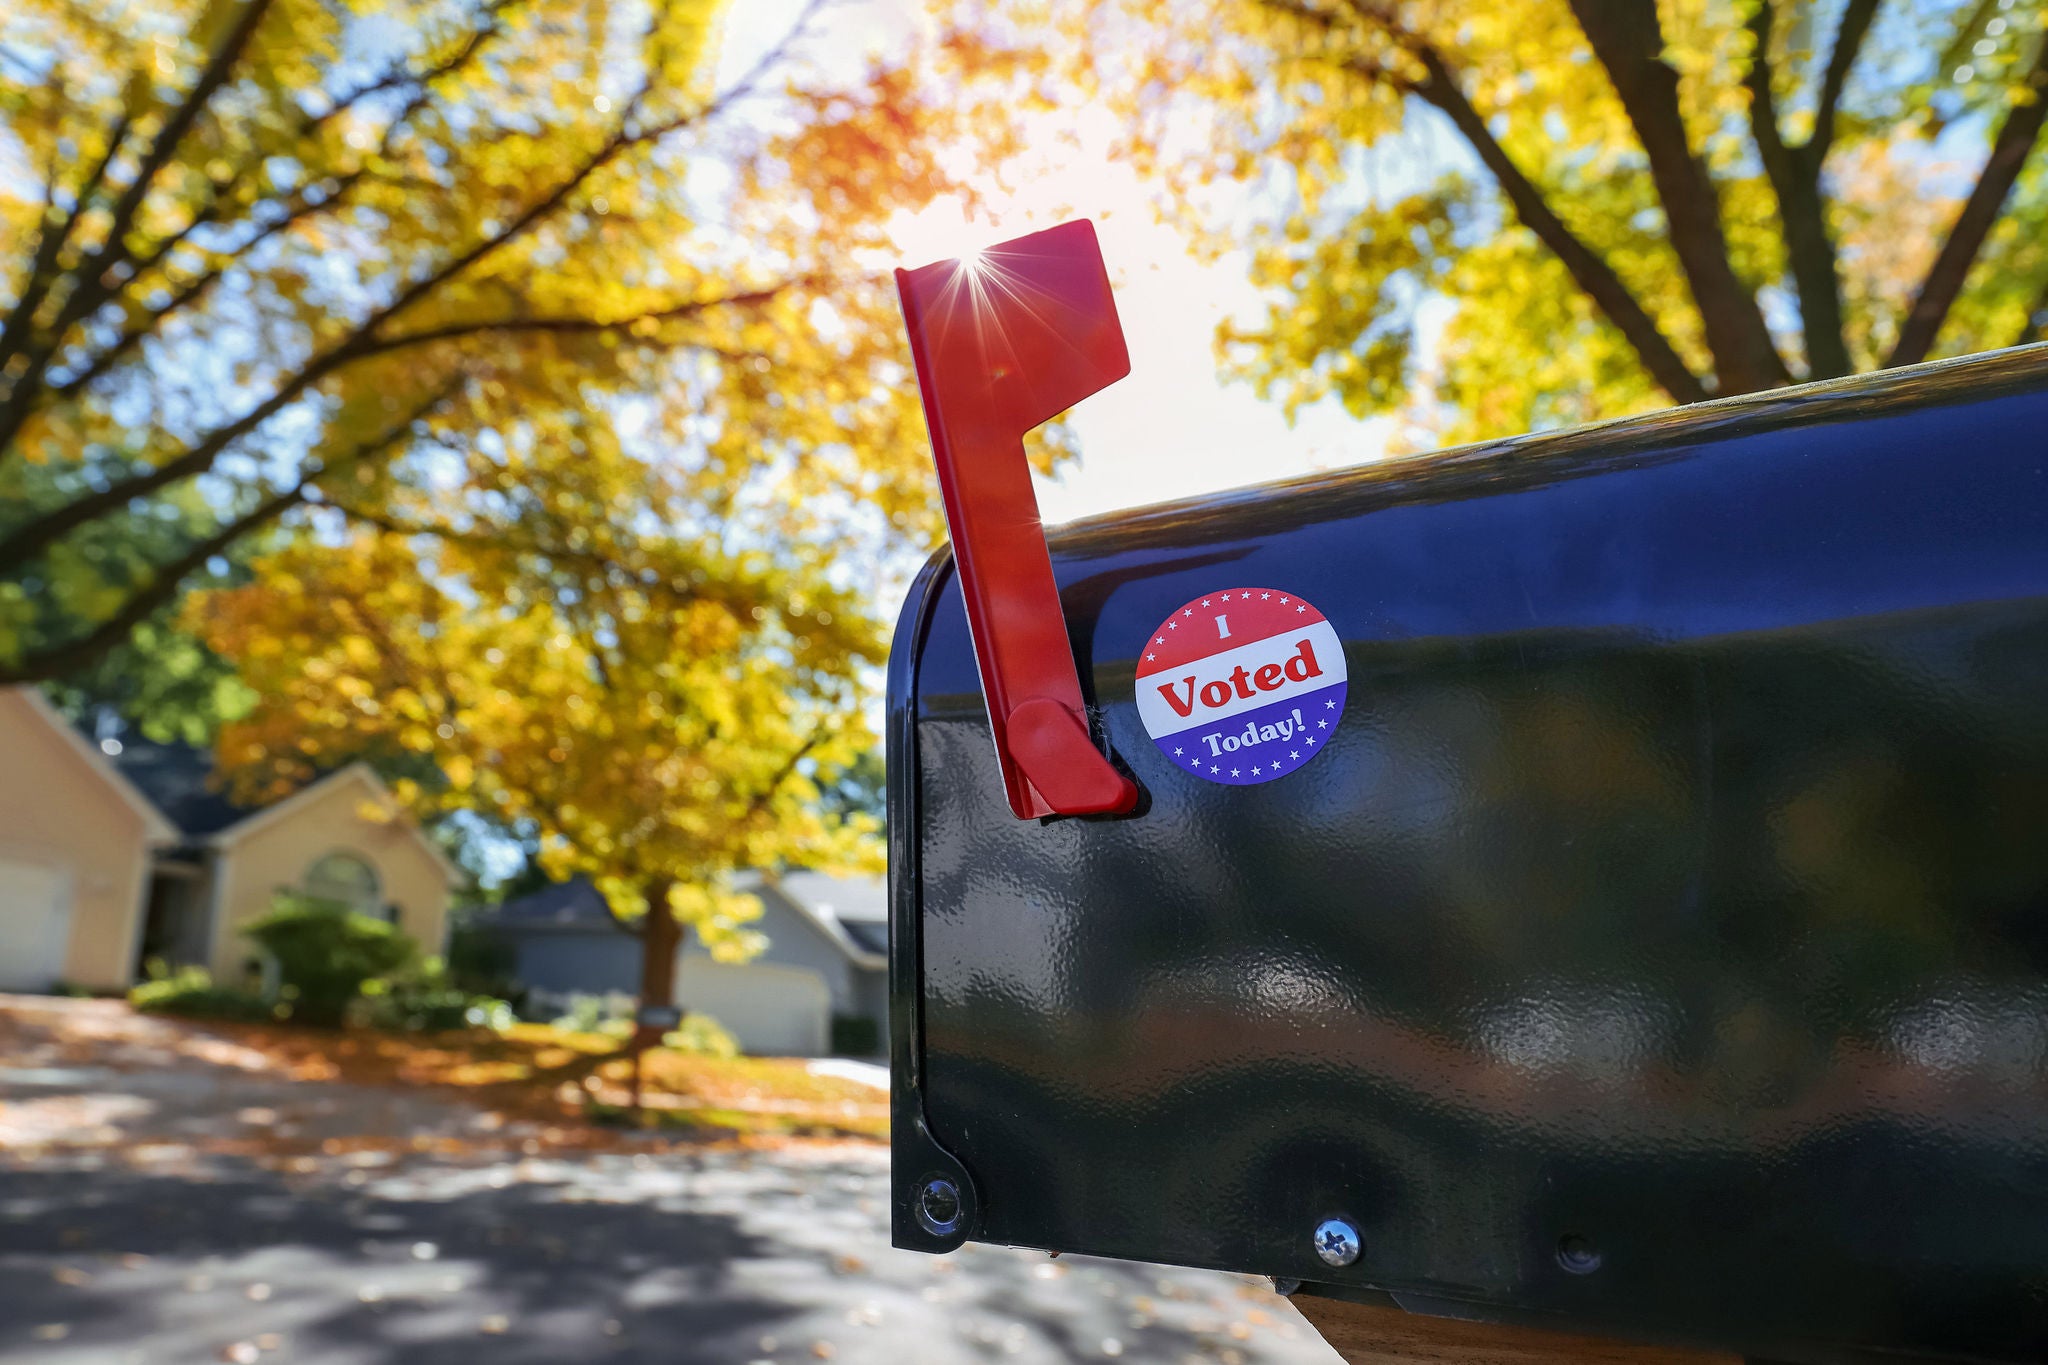 Mailbox with an "I voted today" sticker on it with sun flare behind flag, absentee voting through the mail